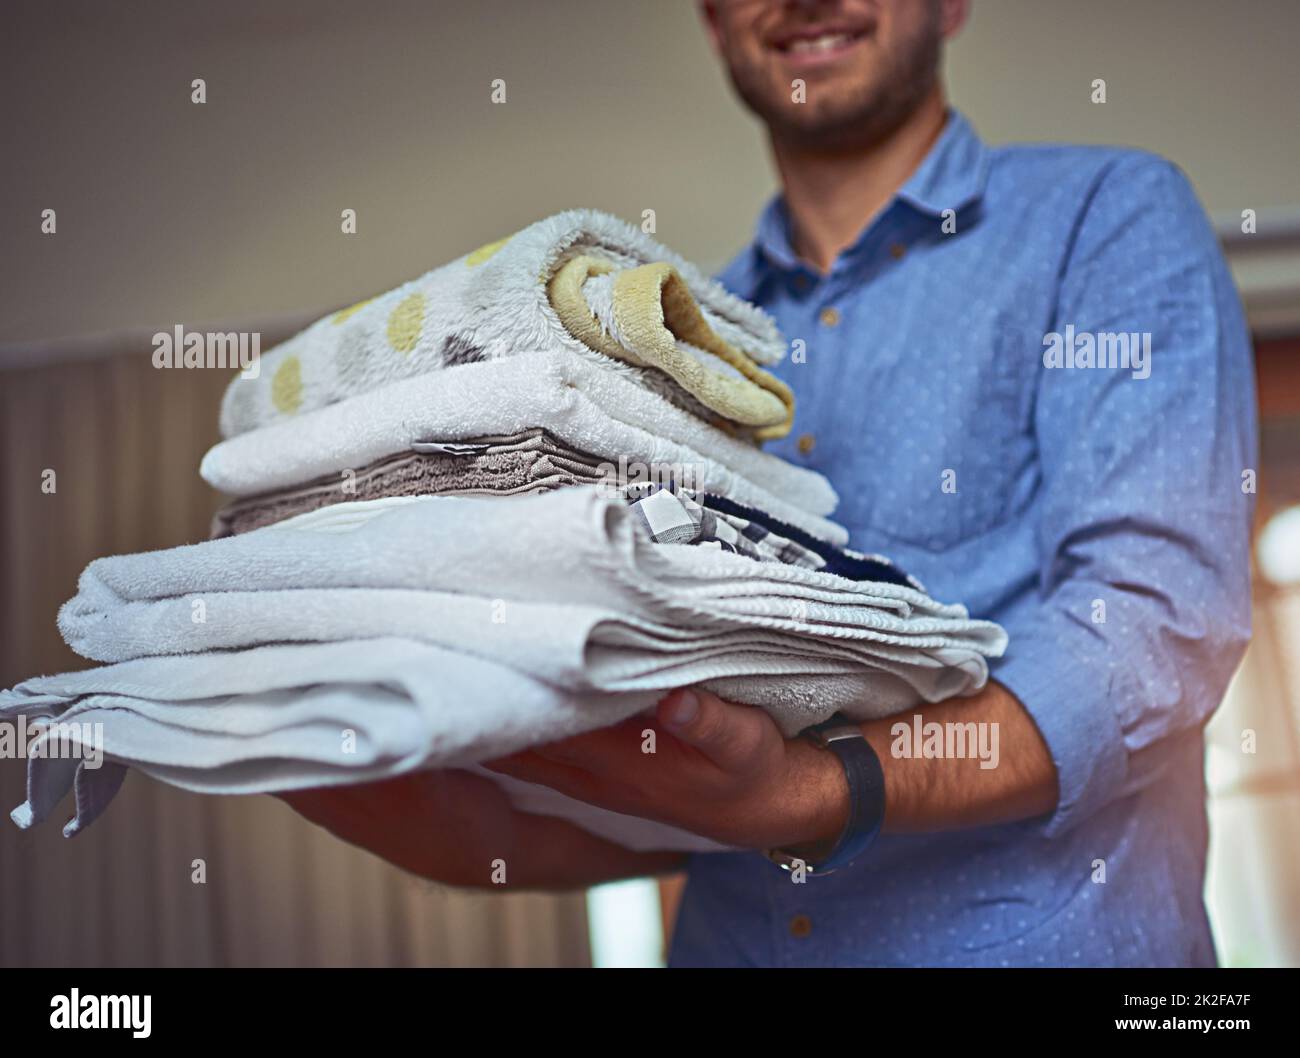 Anyone call for clean towels. Cropped shot of a young man holding a load of freshly folded clean laundry. Stock Photo